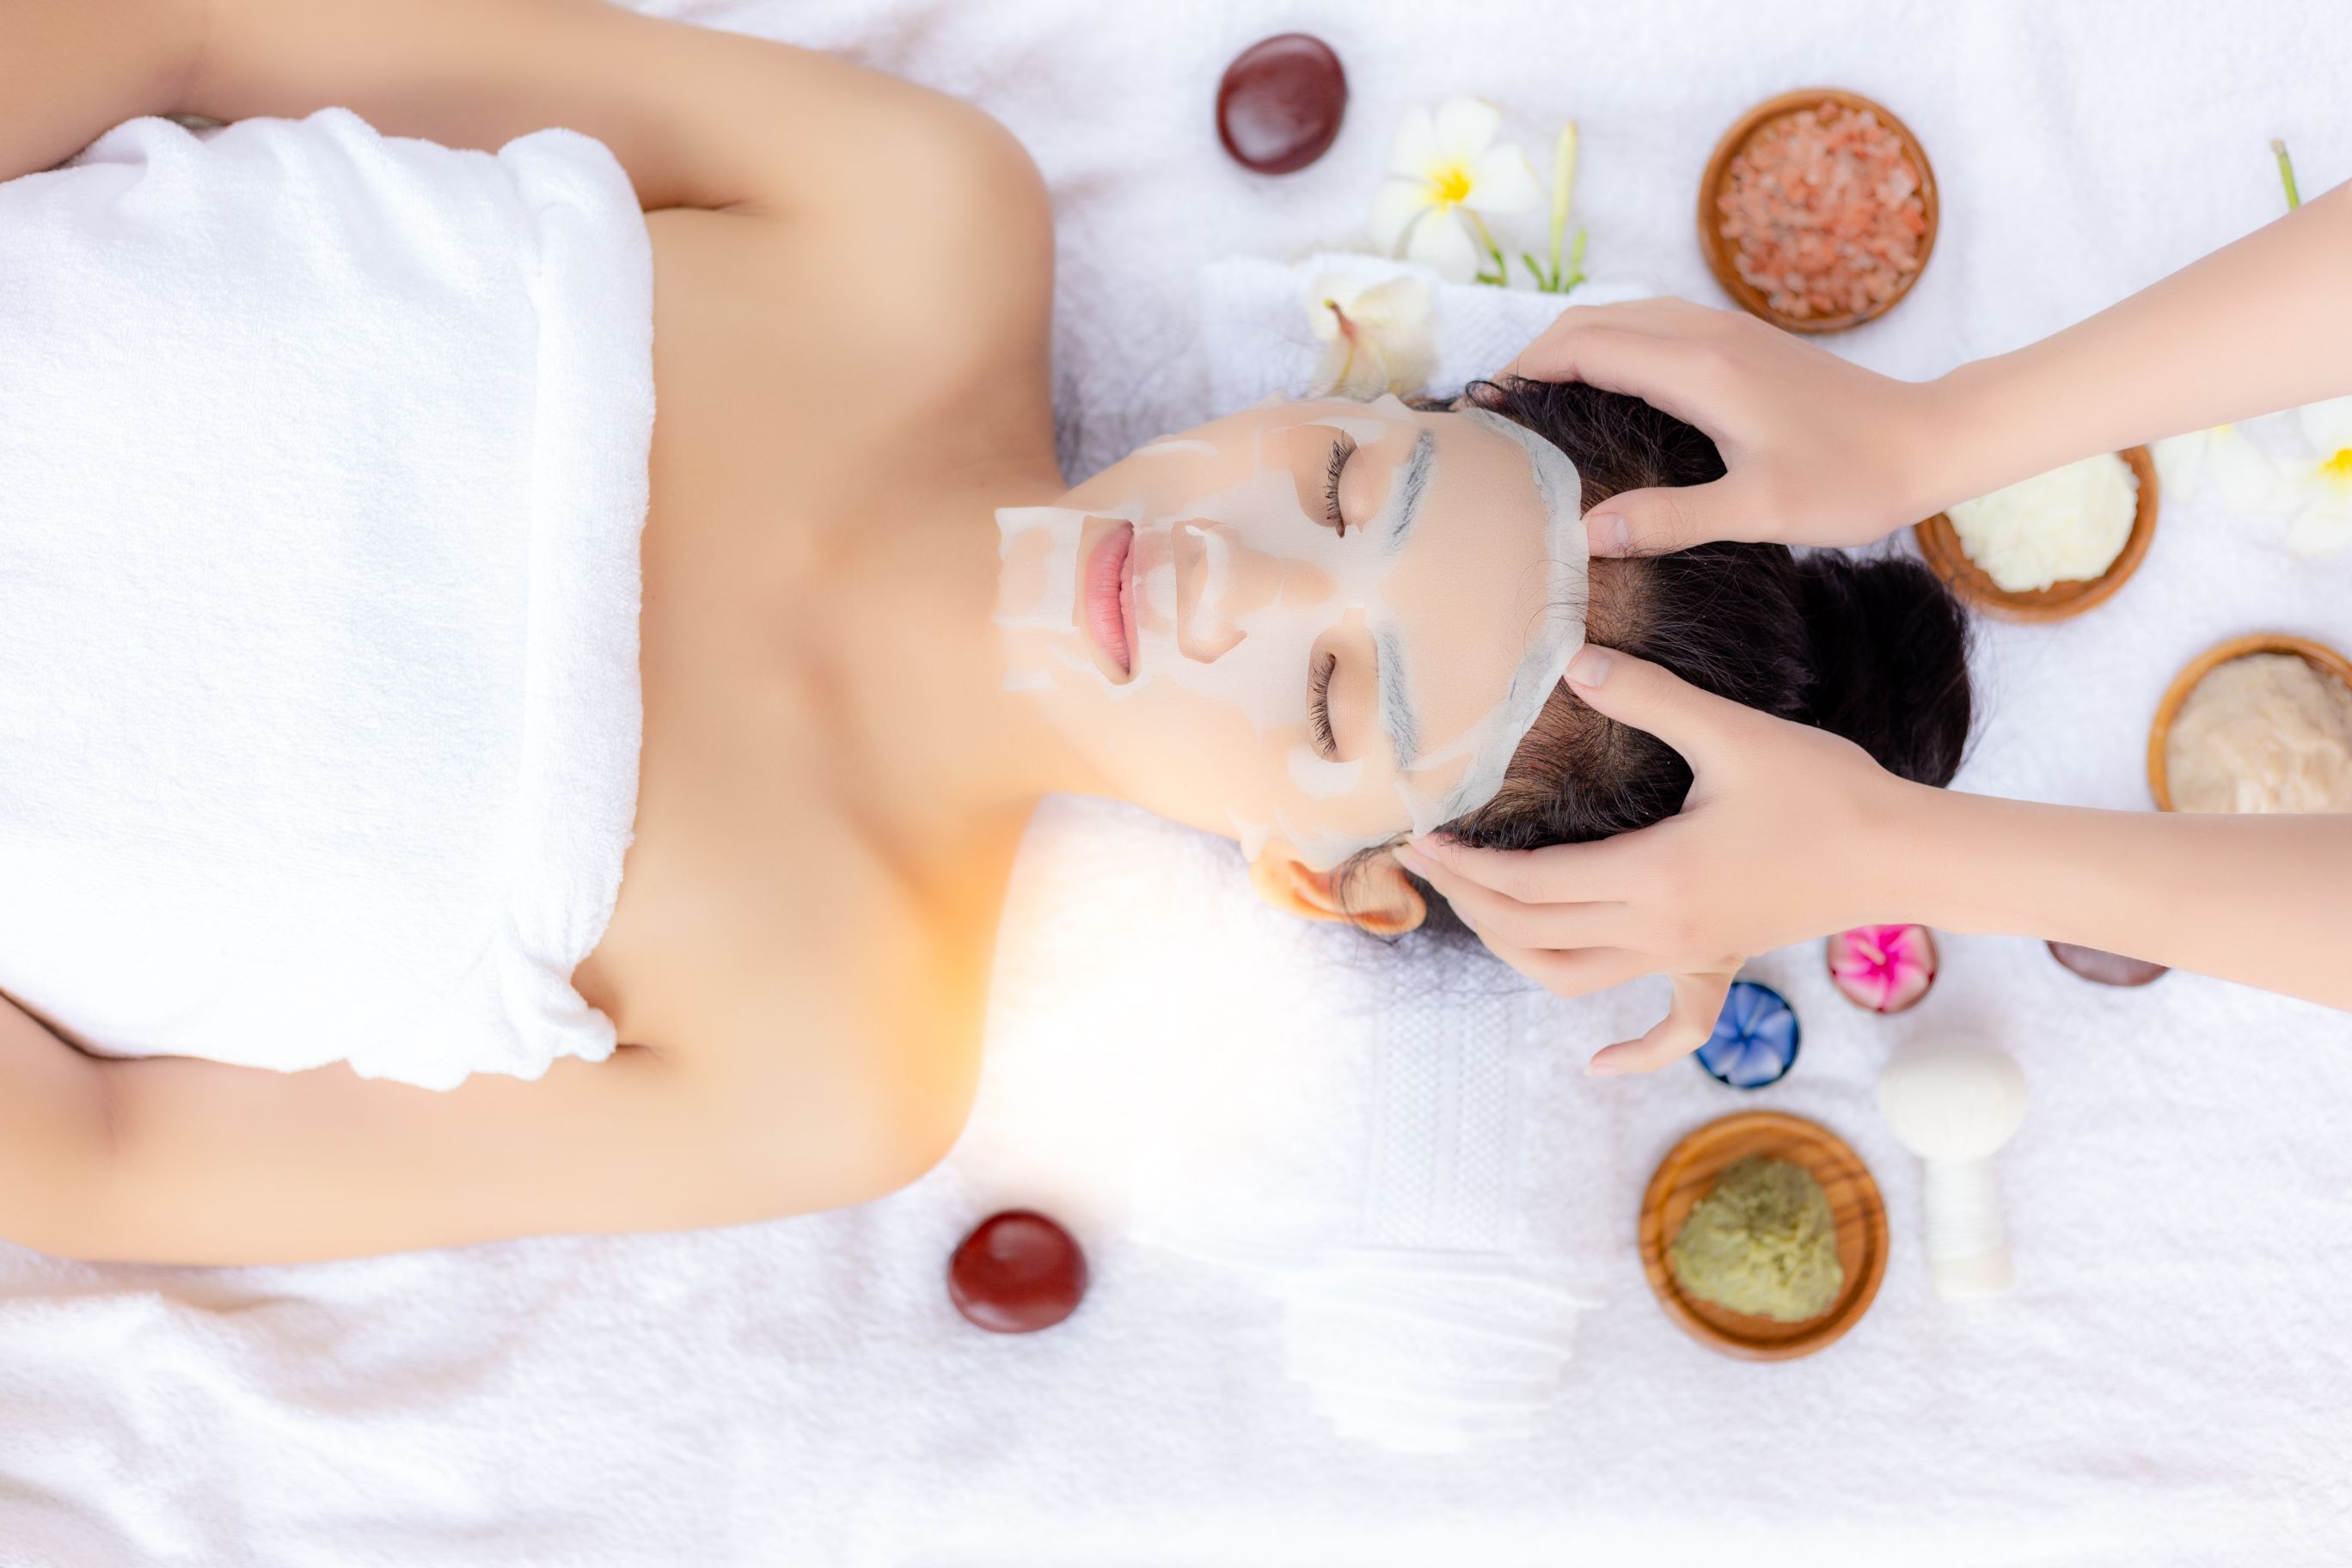 60-min HydraCollagen 24k Ultrasonic Facial for 1 person at Elements Wellness - Get Deals, Cashback and Rewards with ShopBack GO